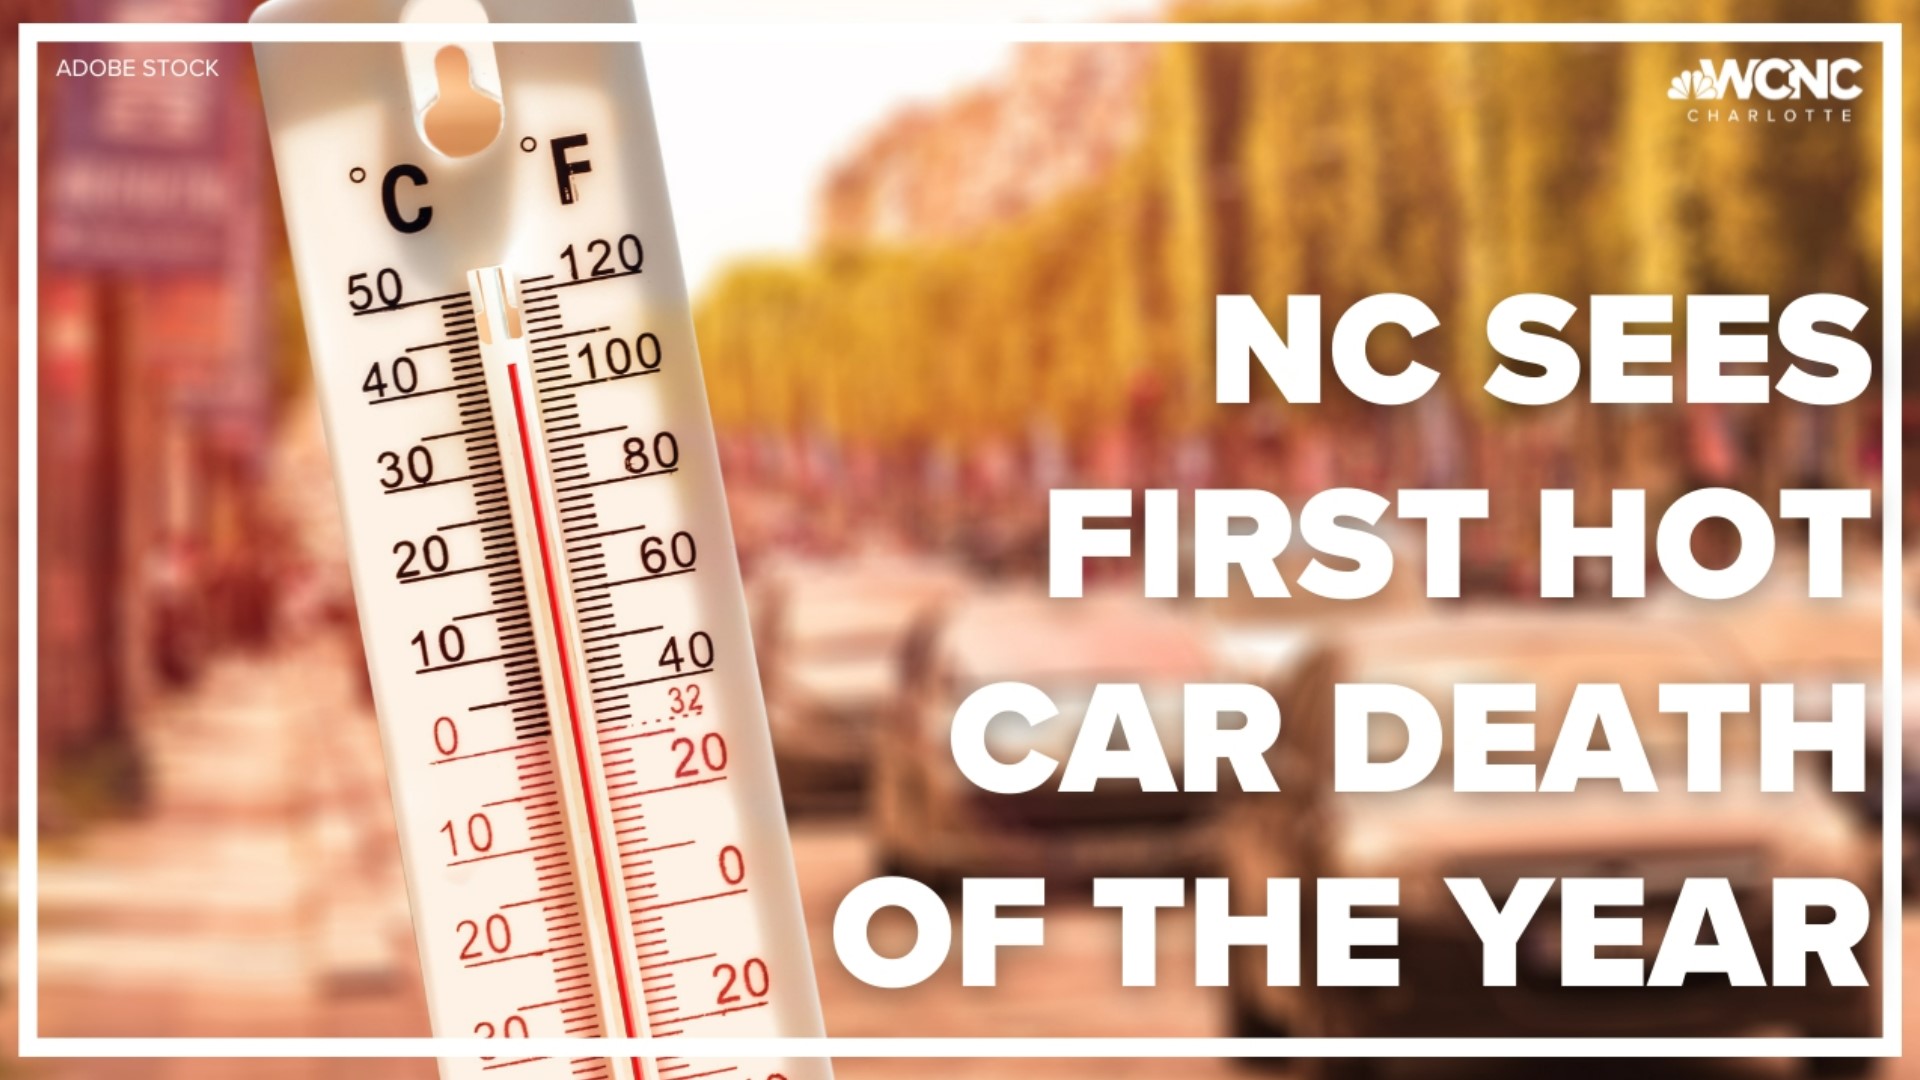 According to Kids and Car Safety, 56% of hot car deaths occur when a child is unknowingly left in a vehicle.